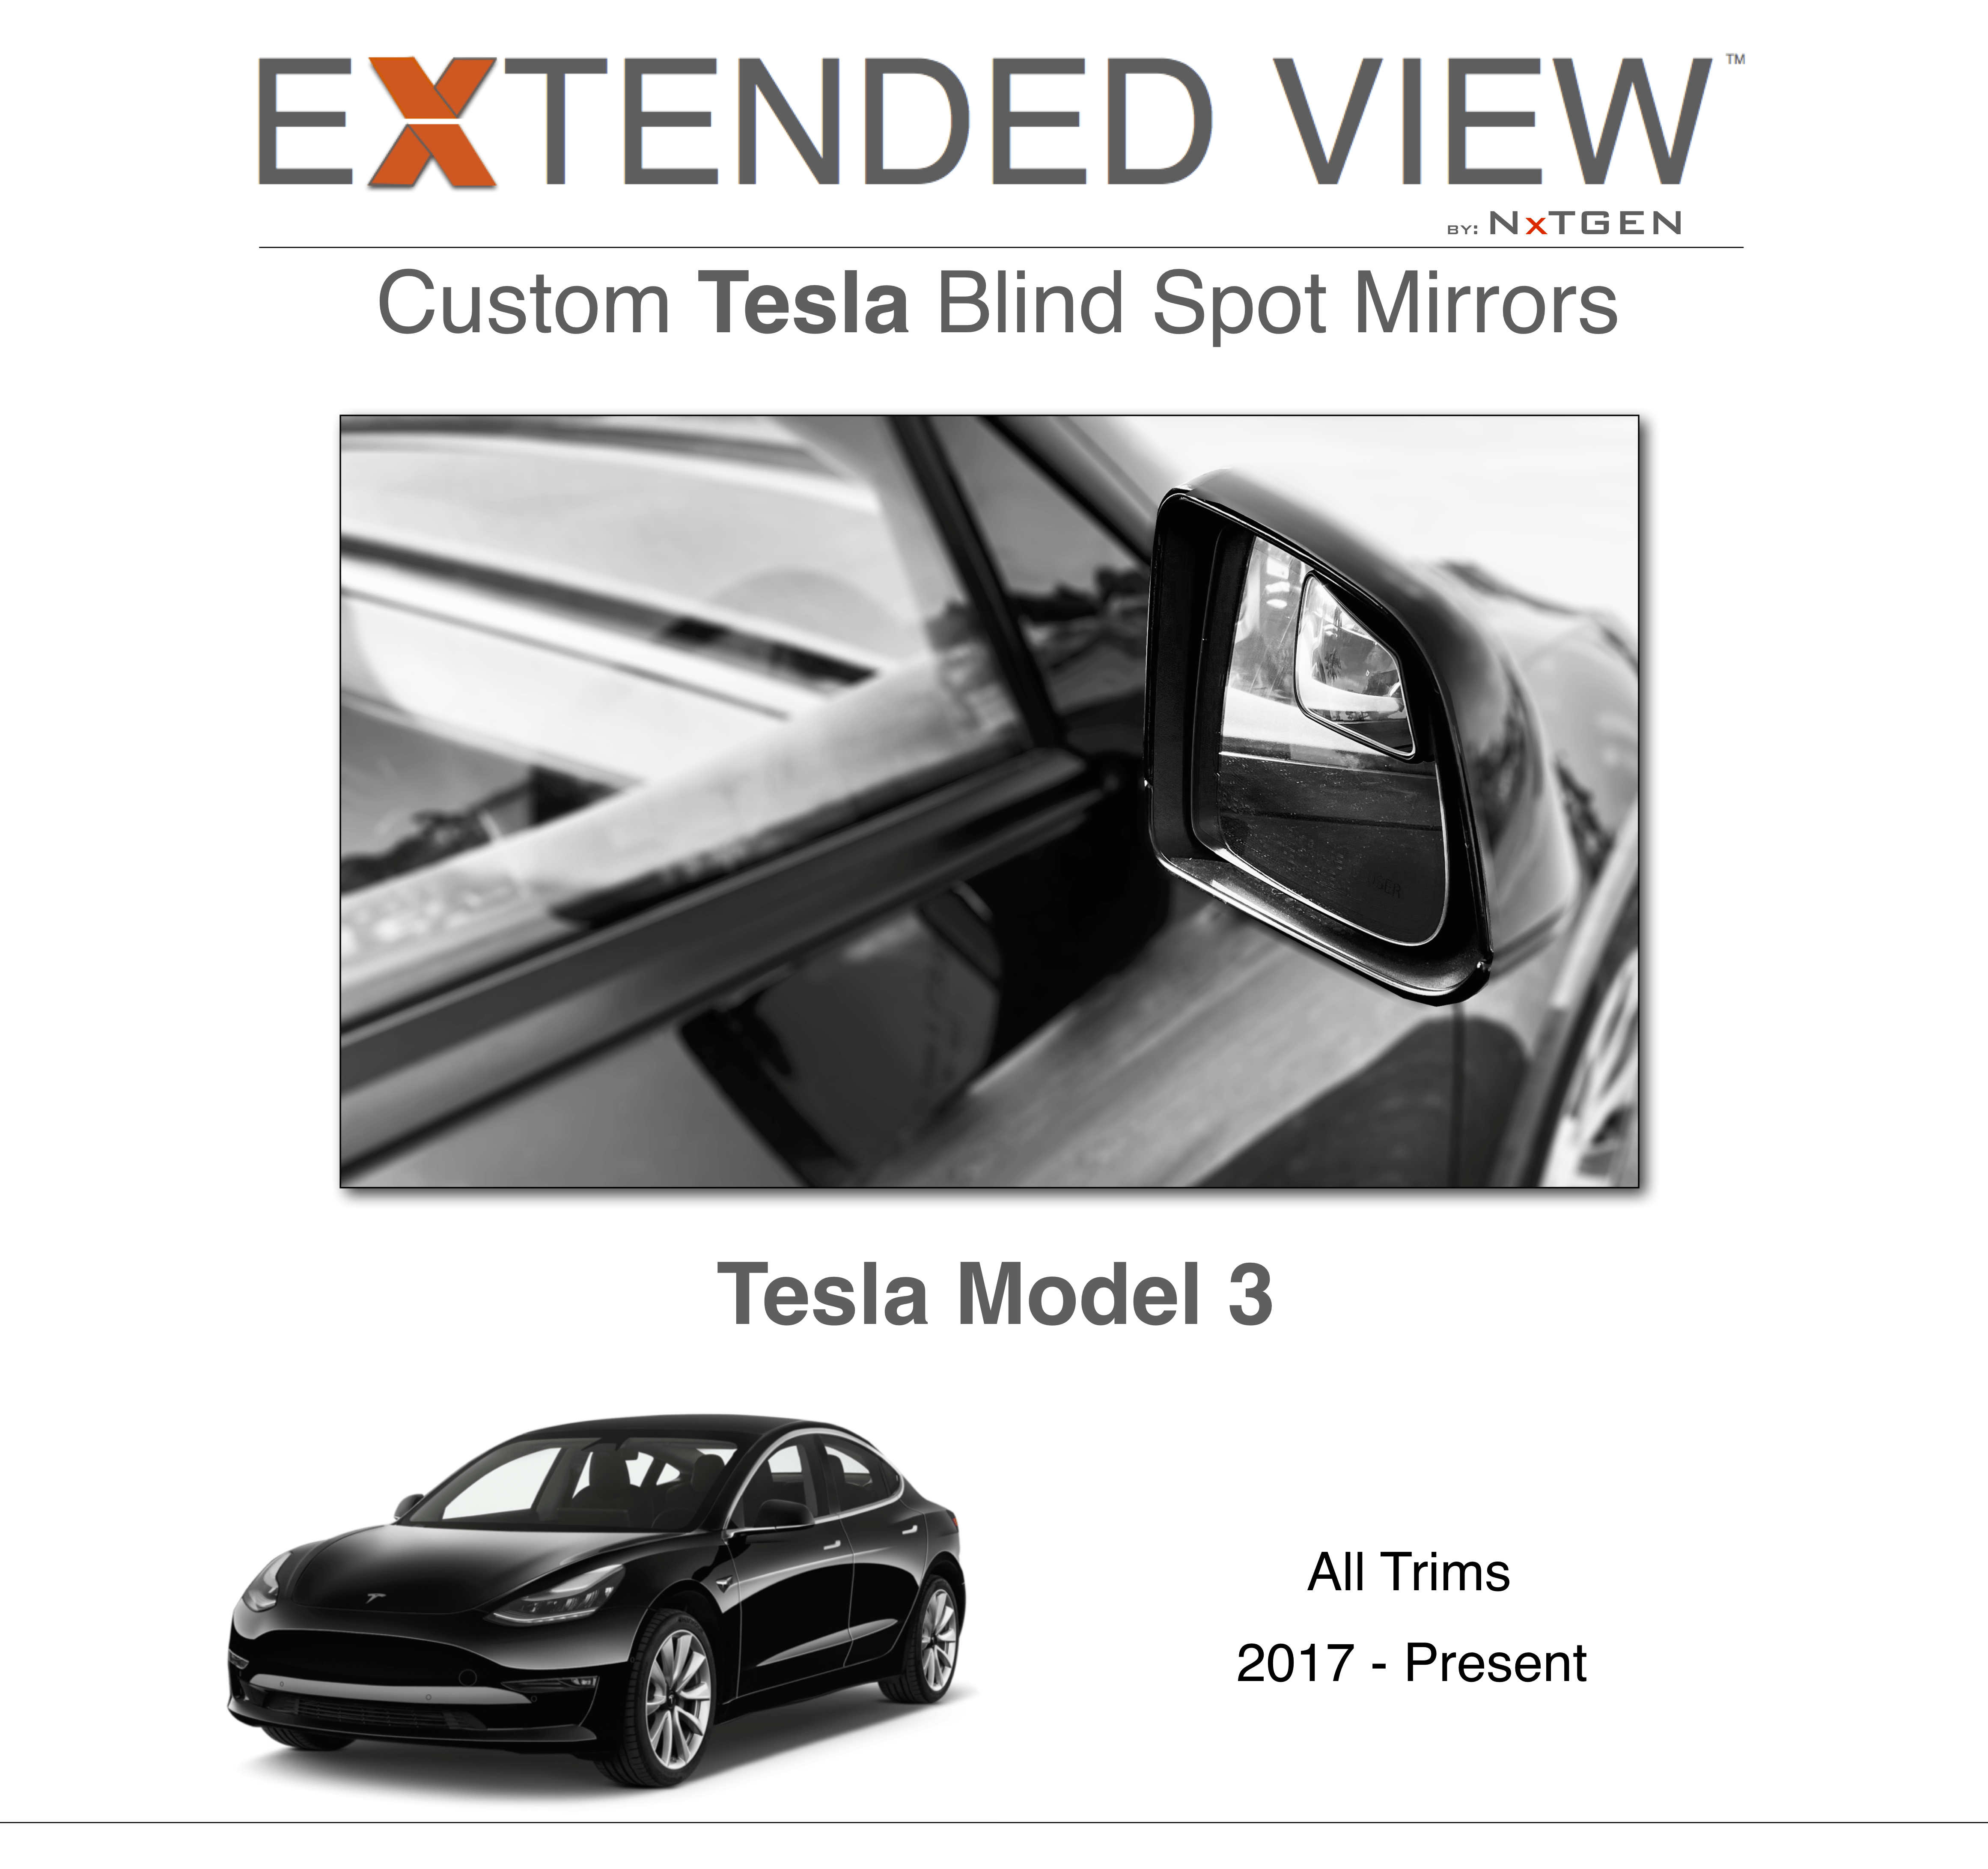 Tesla Model 3 Blind Spot Mirrors | Extended View™